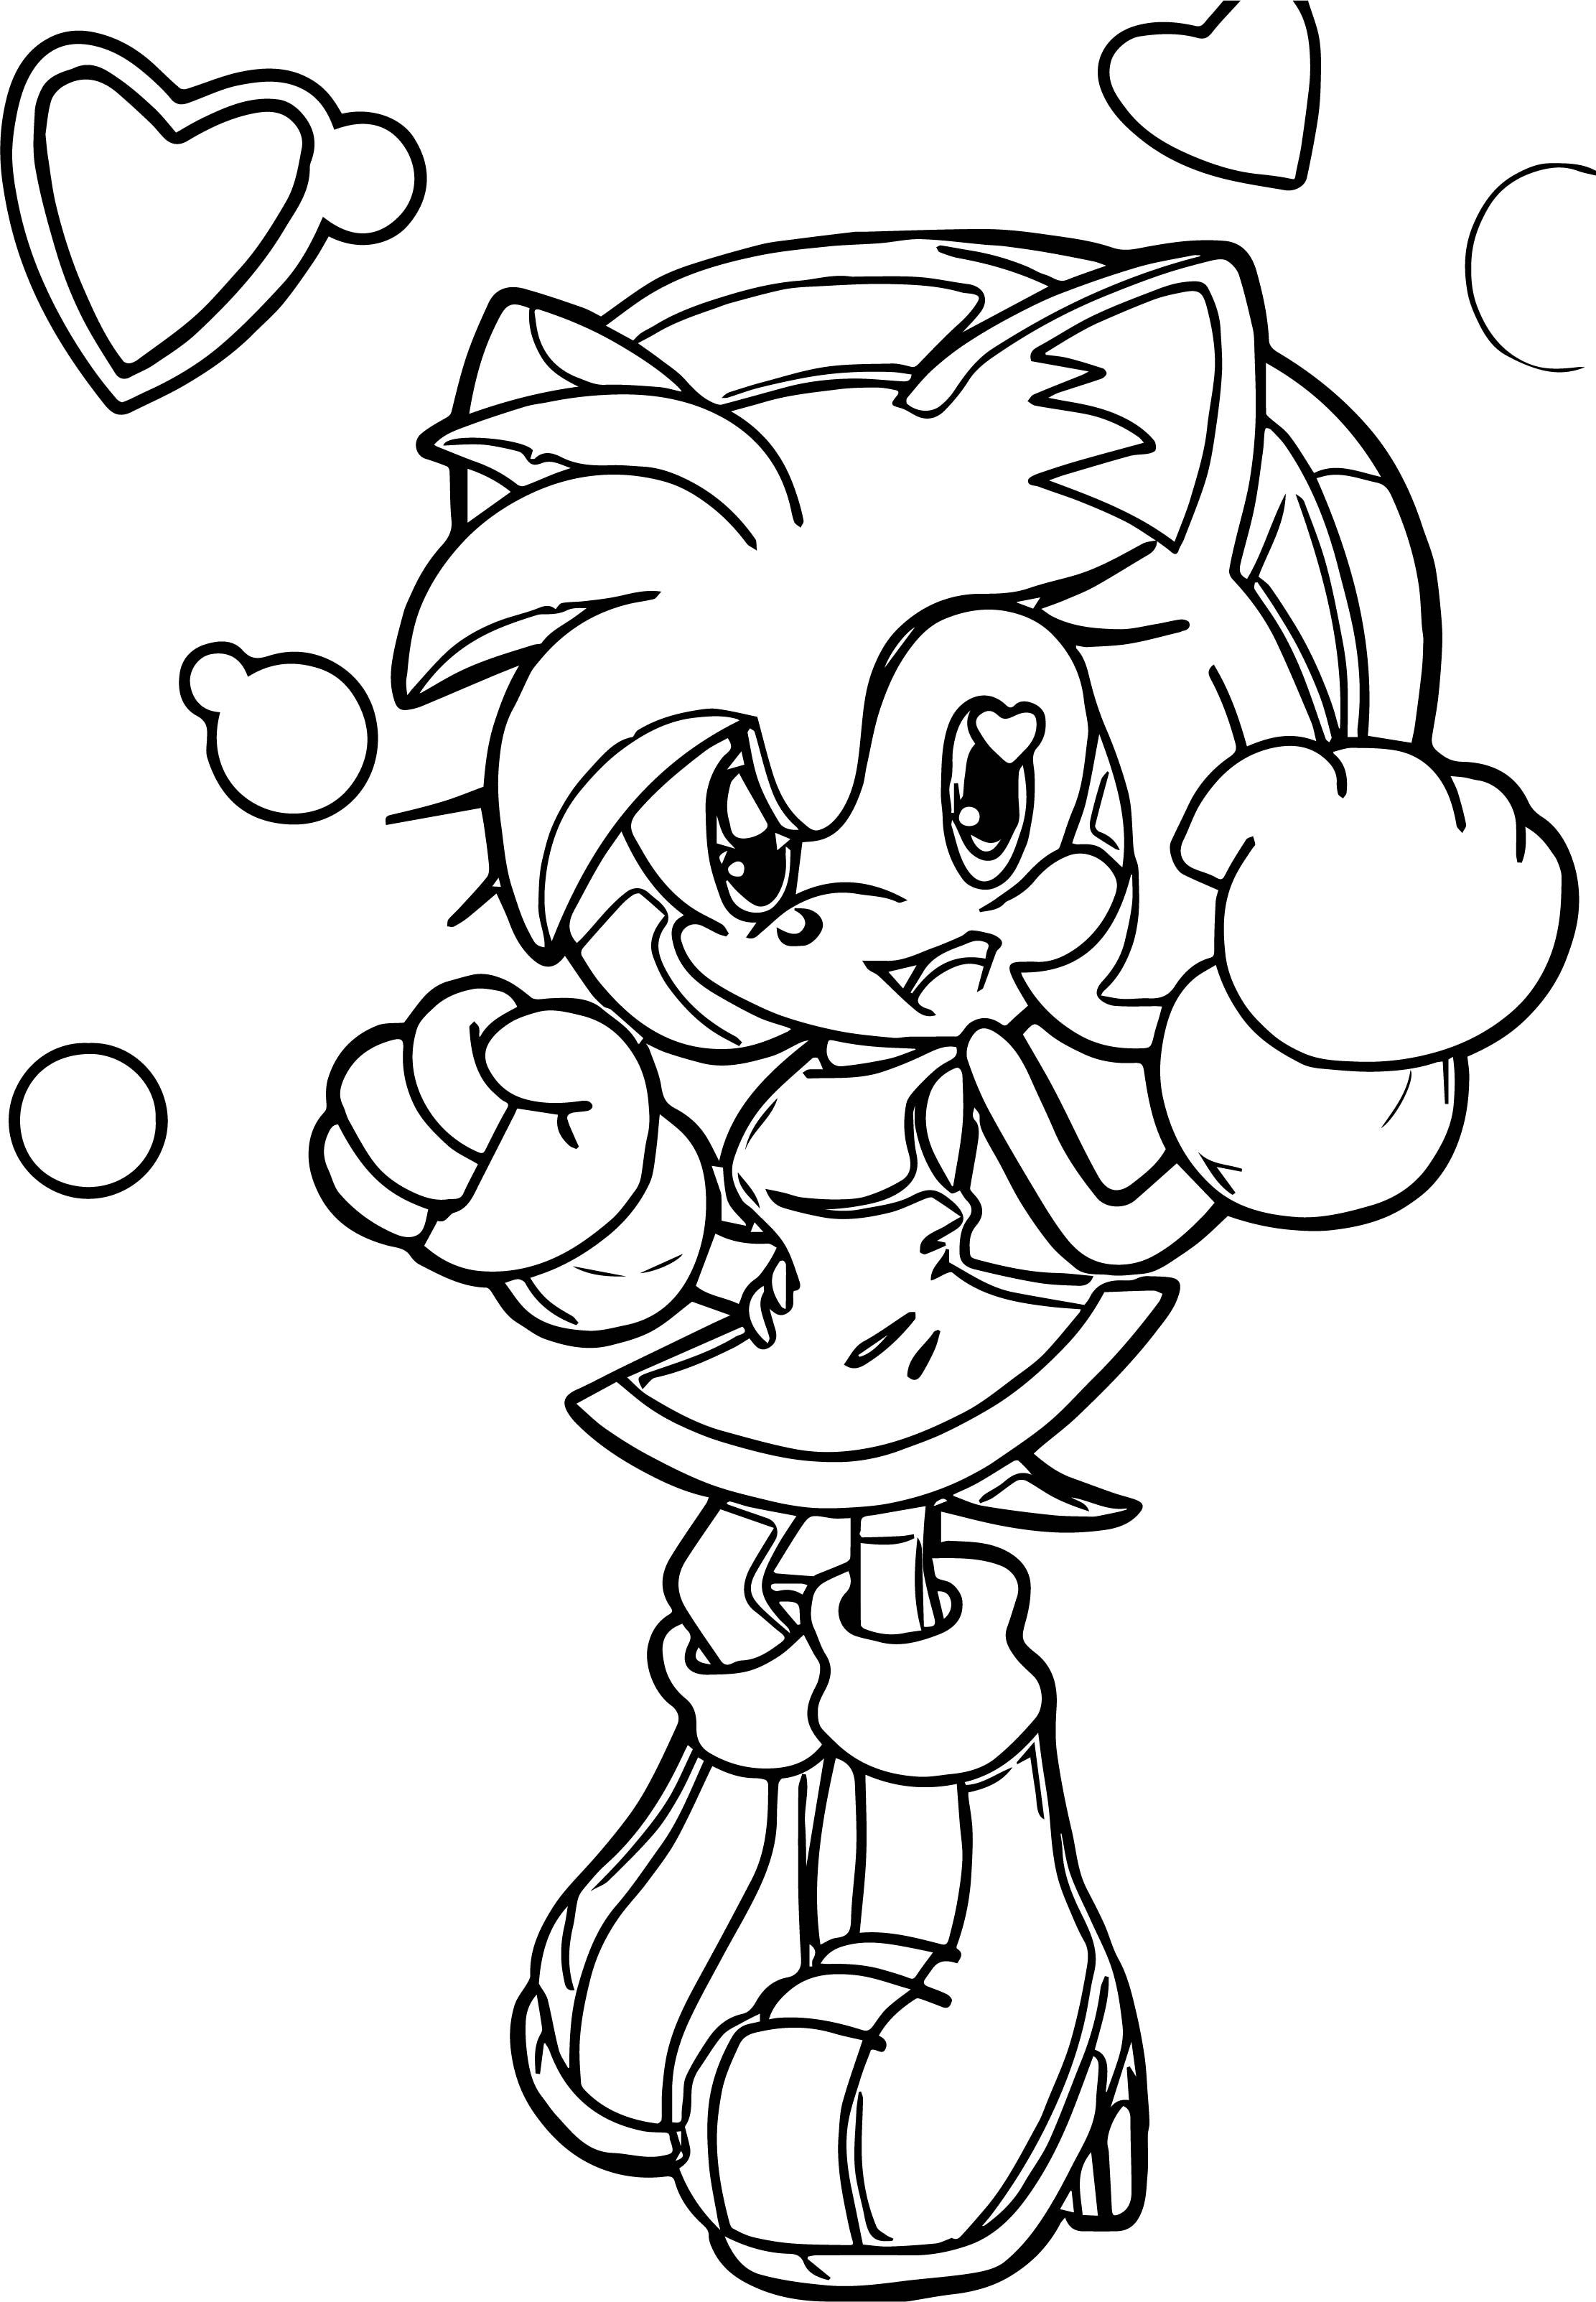 Amy Sonic Coloring Pages.